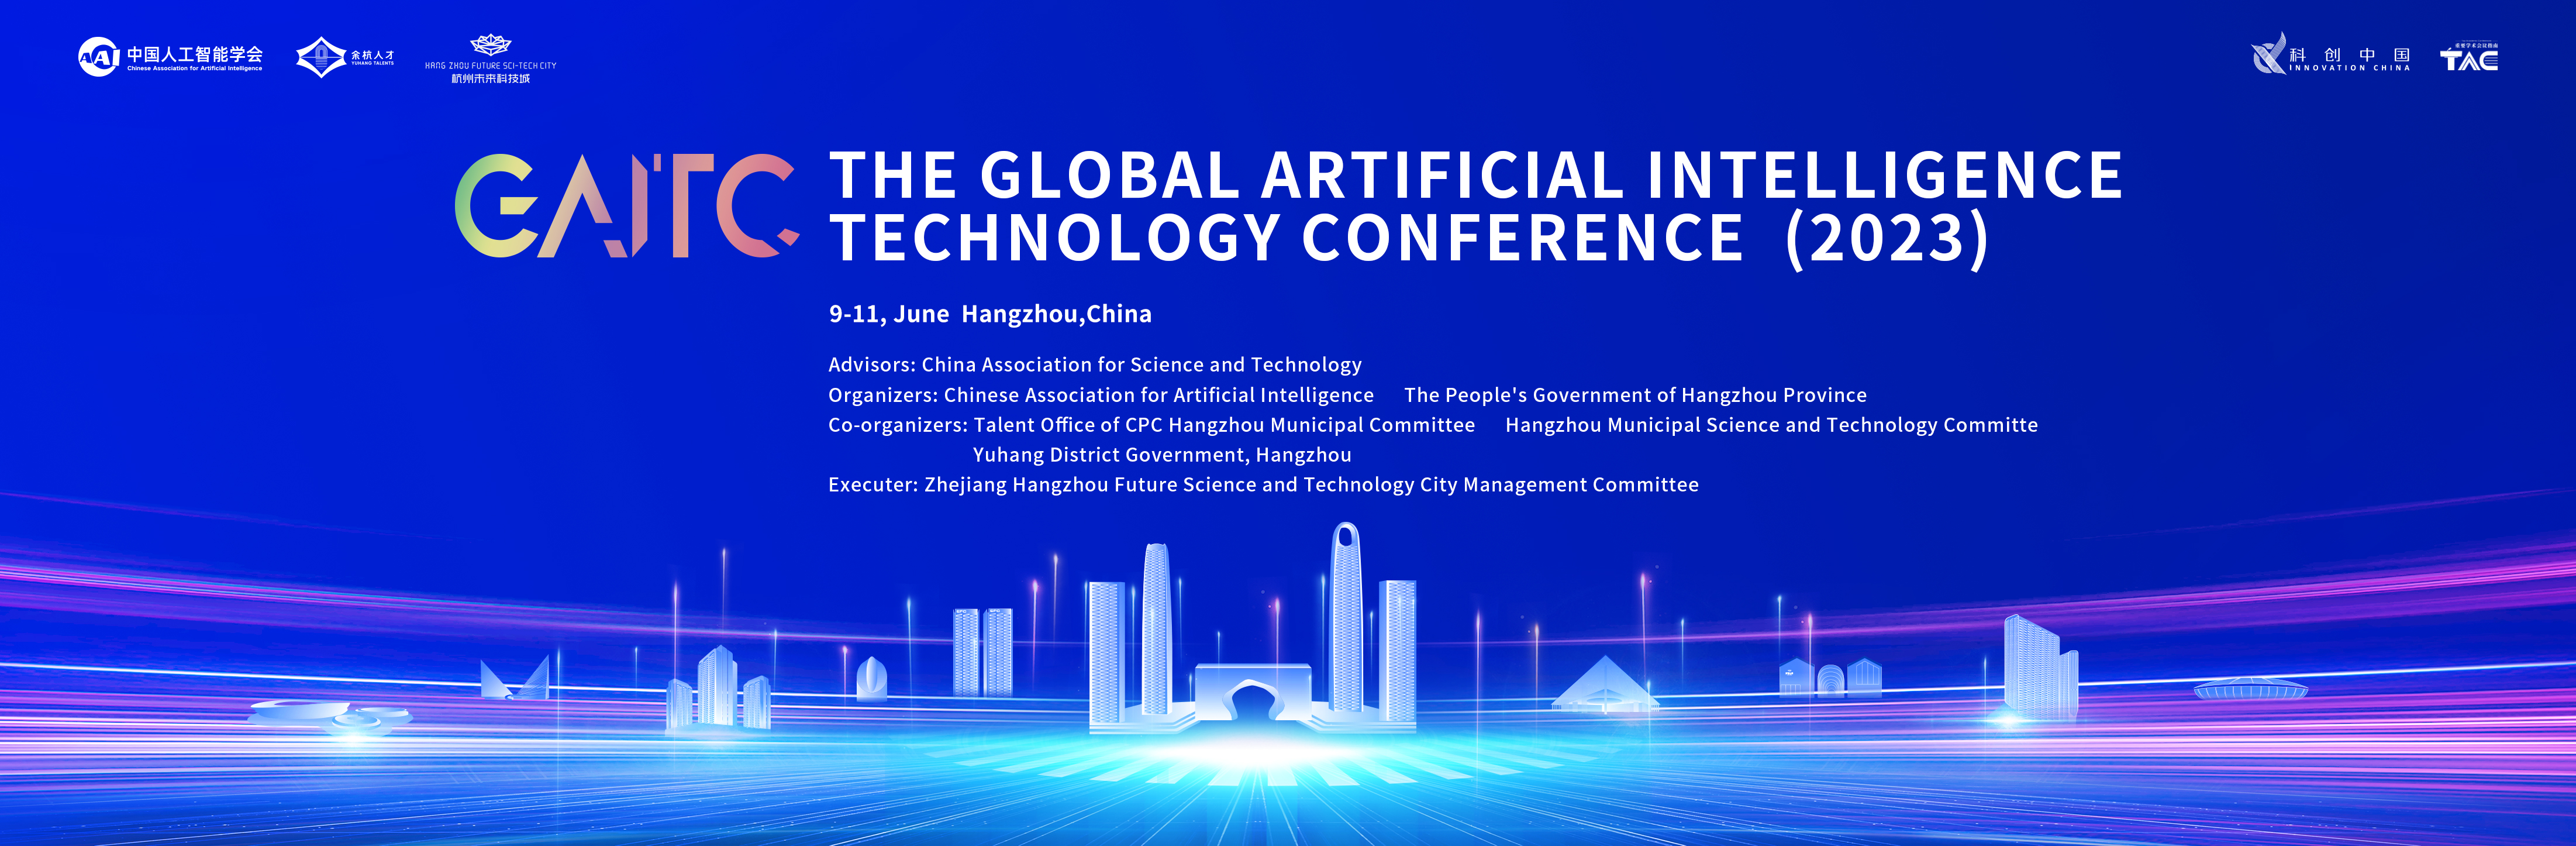 The global artificial intelligence technology conference